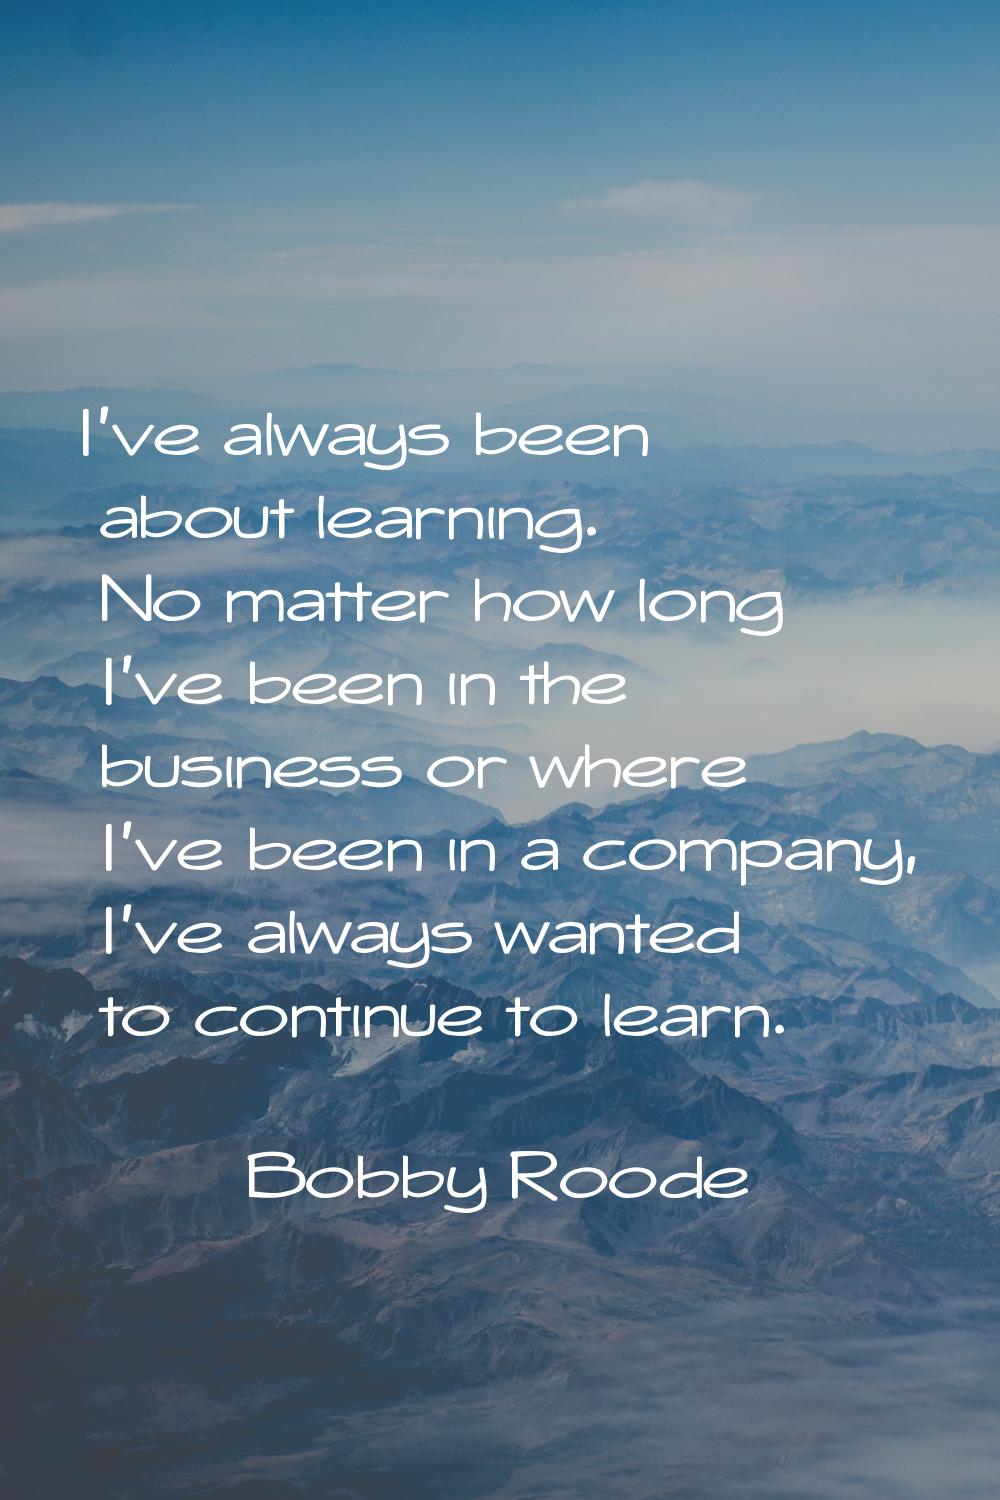 I've always been about learning. No matter how long I've been in the business or where I've been in